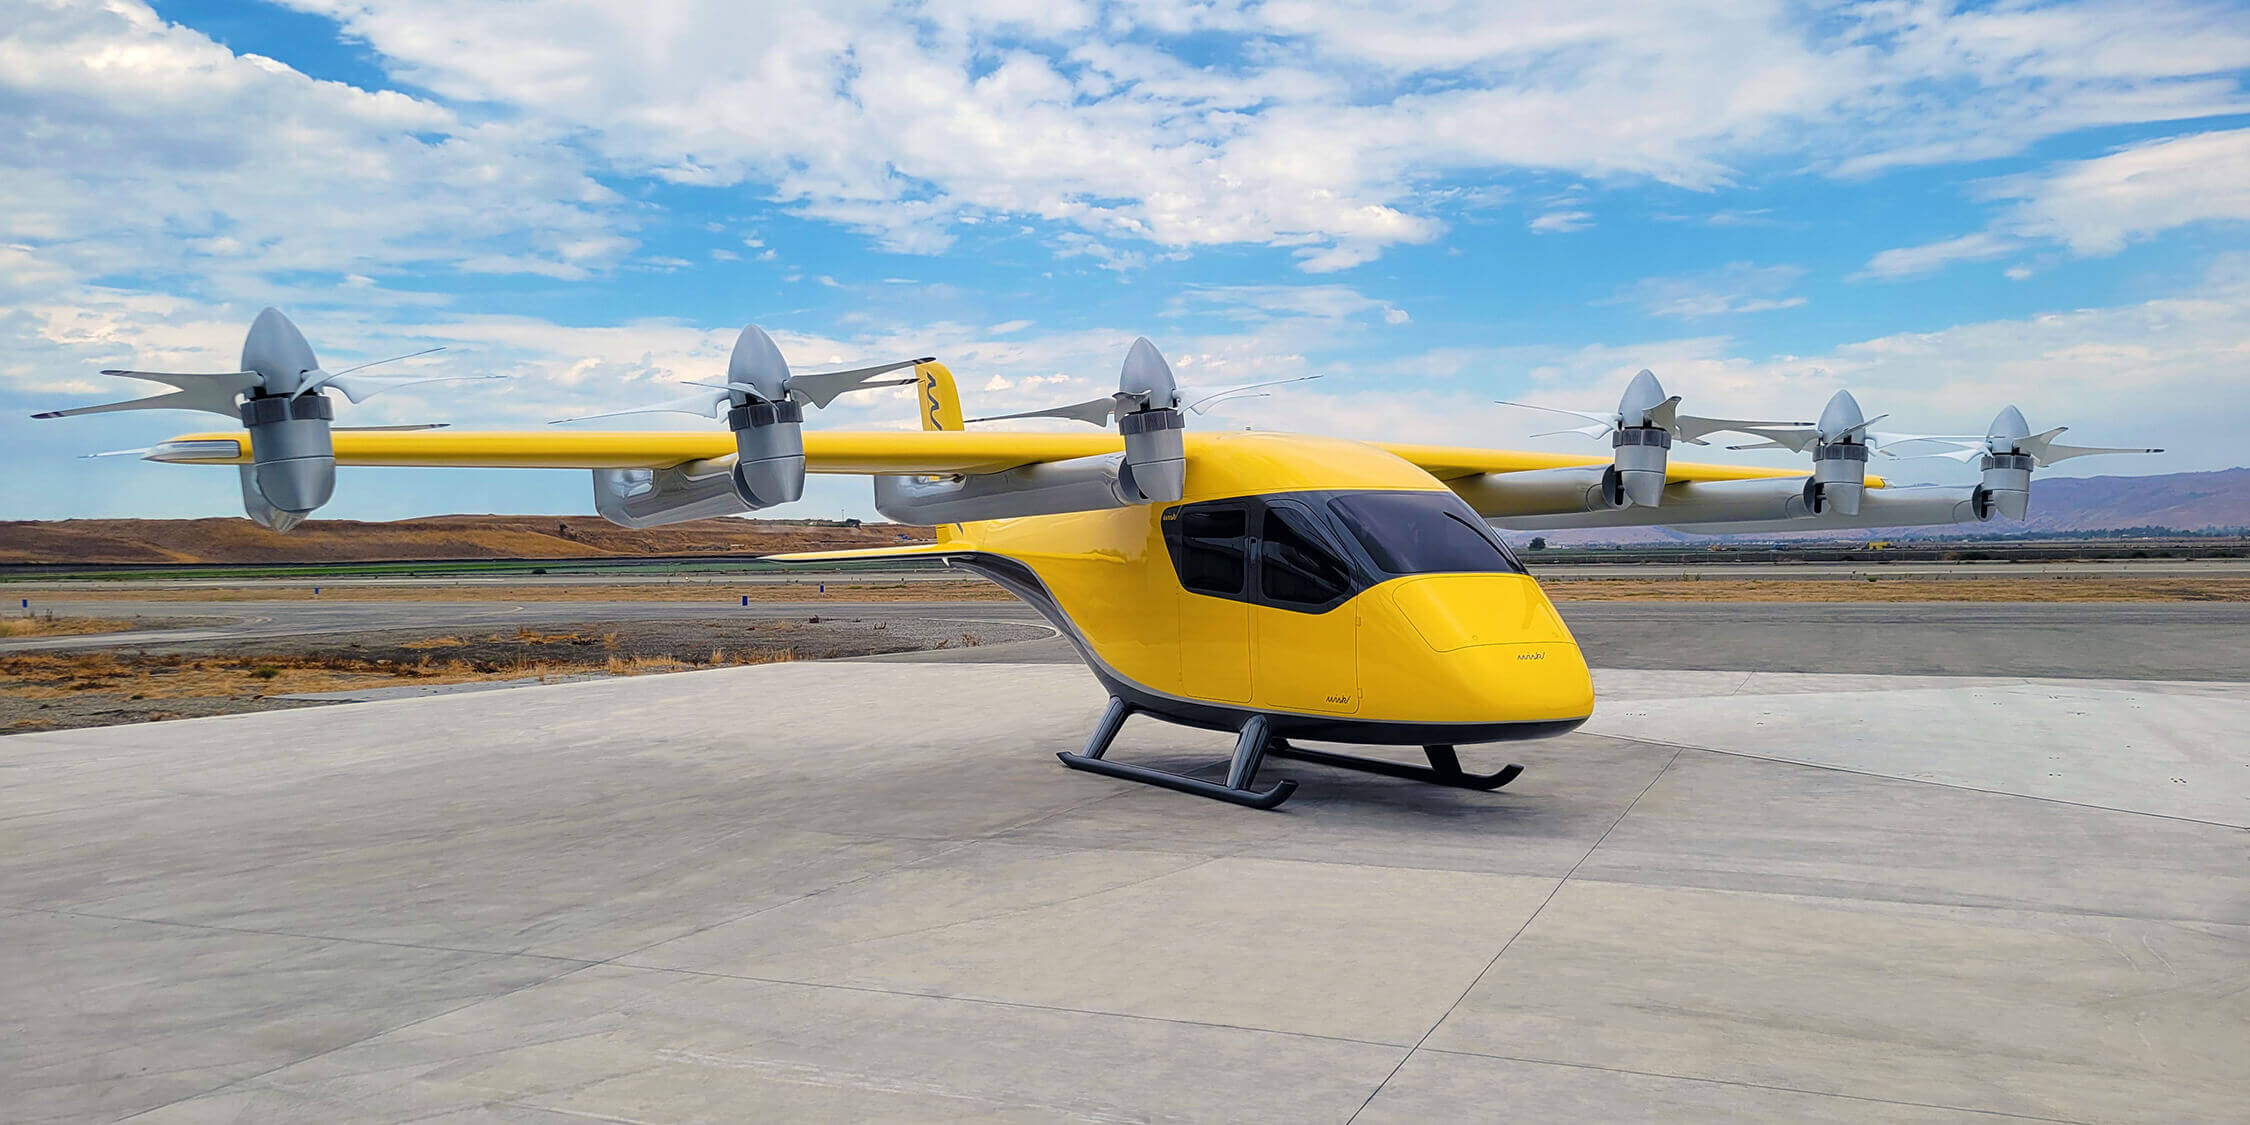 Wisk Unveils World’s First Self-Flying, Four-Seat, All-Electric, Vertical Takeoff and Landing Air Taxi